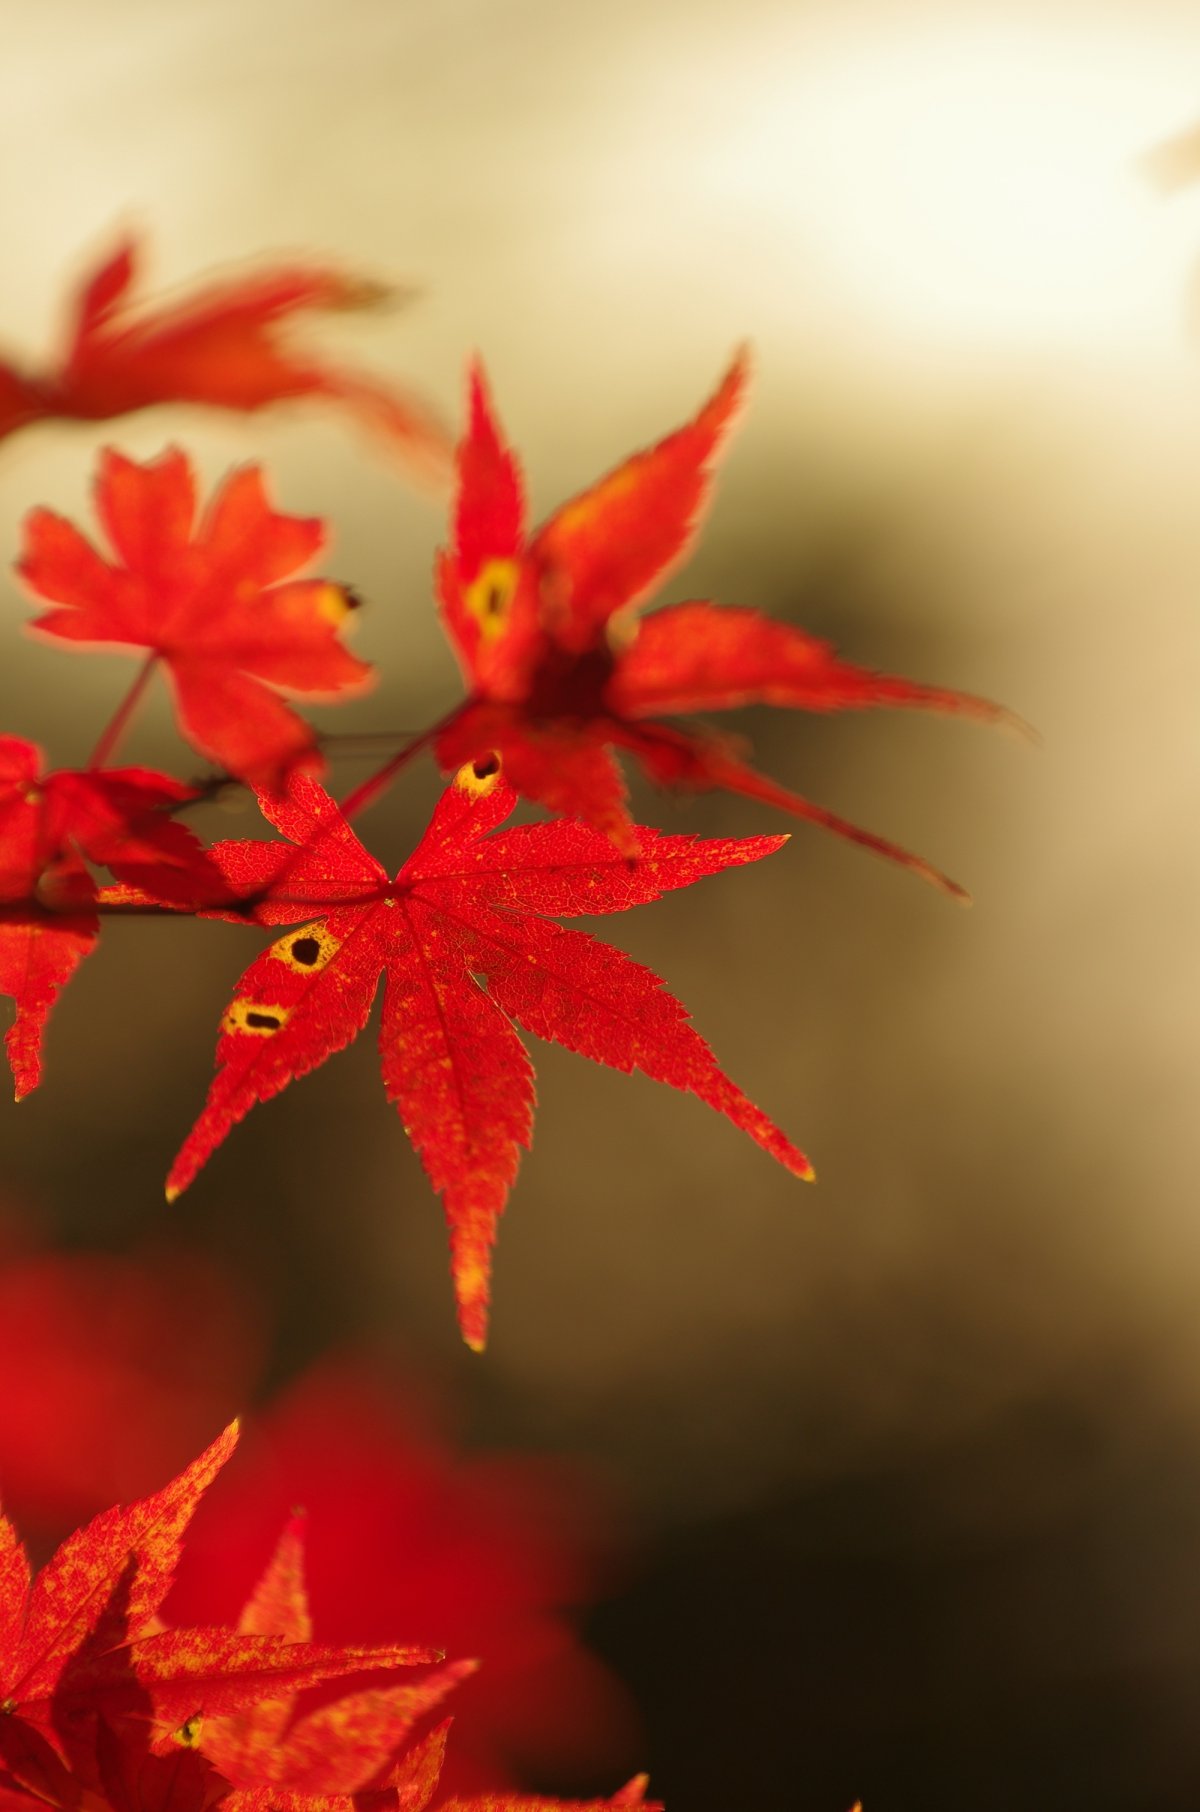 Gorgeous and charming red maple leaf pictures